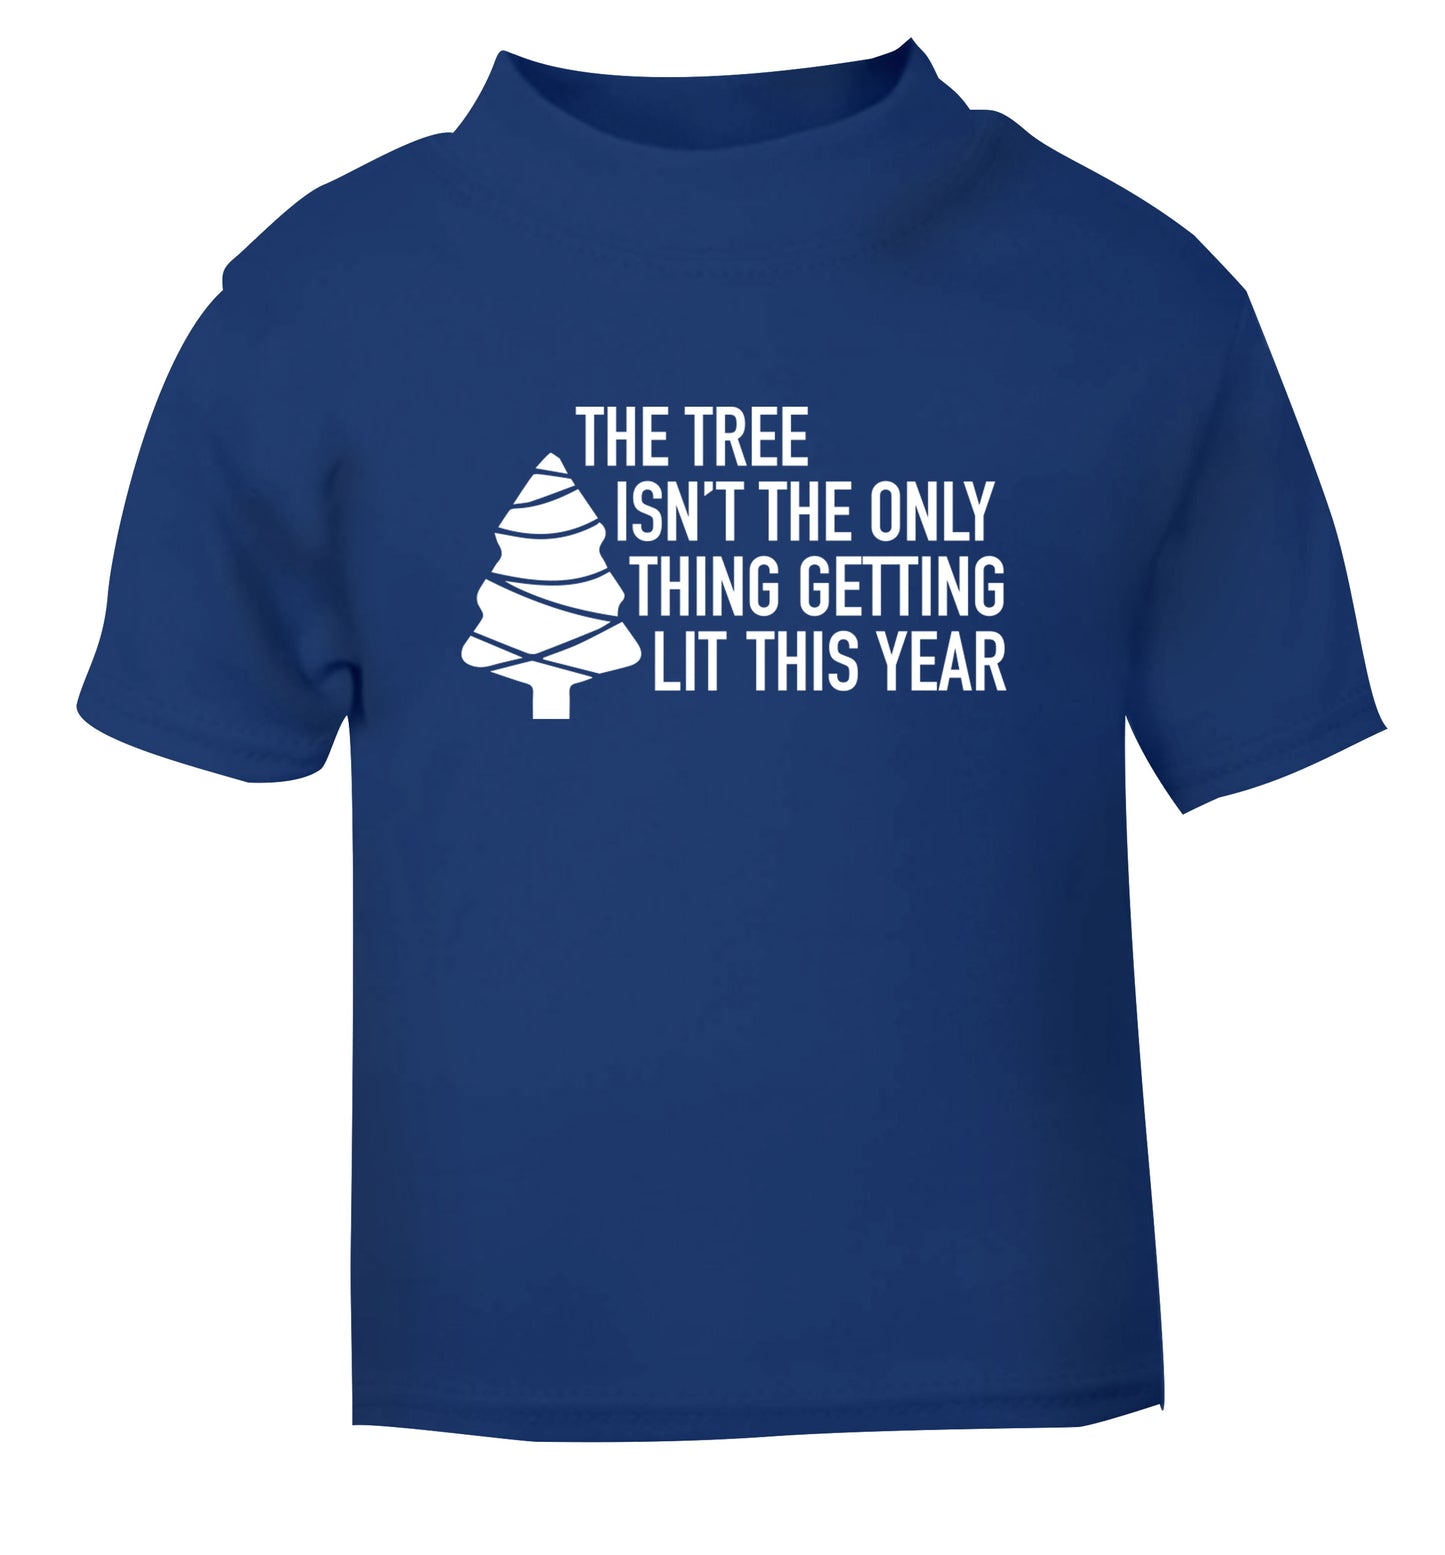 The tree isn't the only thing getting lit this year blue Baby Toddler Tshirt 2 Years